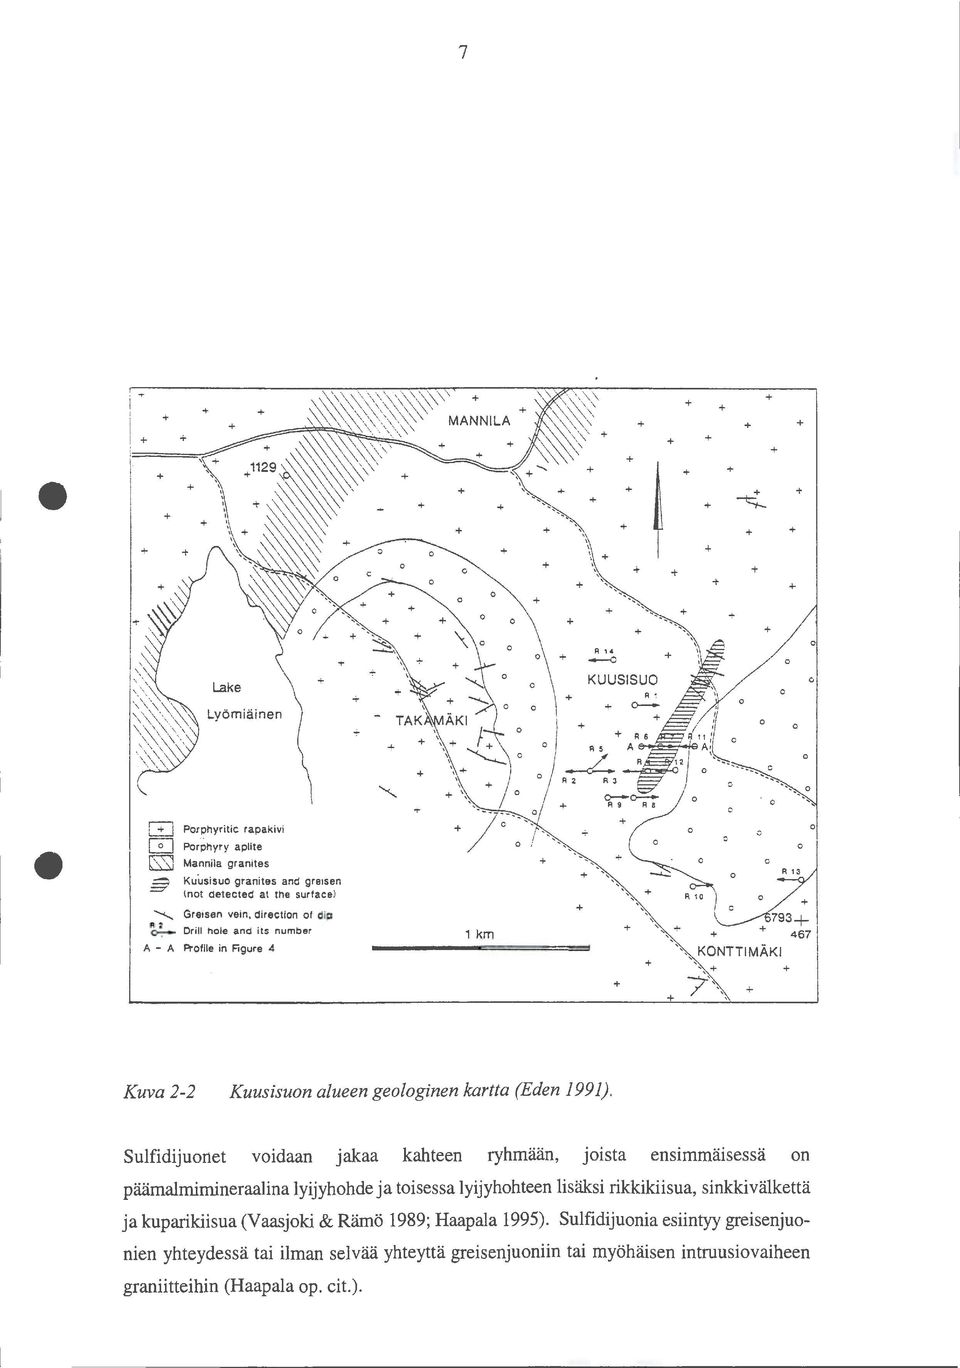 greisen lnot detected at the surfacel Greisen vein, direction of dip ~ Drill hole and its number A - A Profile in Figure 4 + + 1 km + + + + + + ',~, 793+ + ",_+ + + 467 ',," KONTTIMÄKI + ', + +